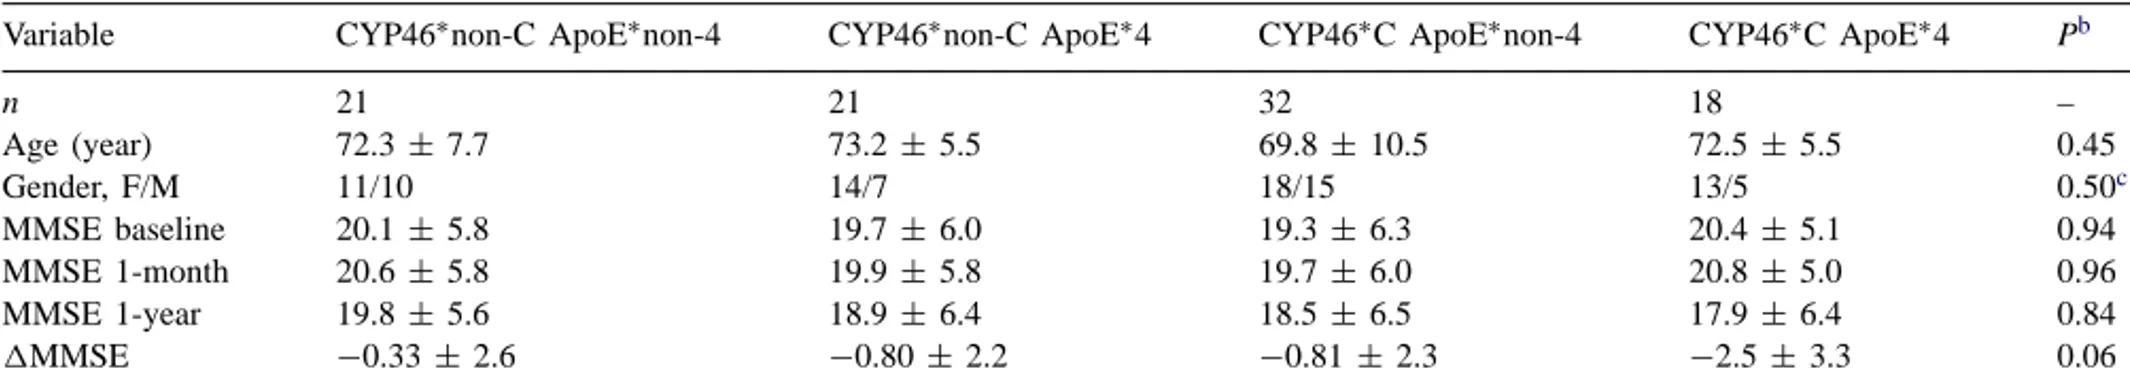 Table 1 ). The presence of at least one of ∗ C allele (CYP46 ∗ C: CYP46 C/T or CYP C/C) was higher in AD patients (54.6%) compared to control subjects (35.8%, P &lt; 0.0001).